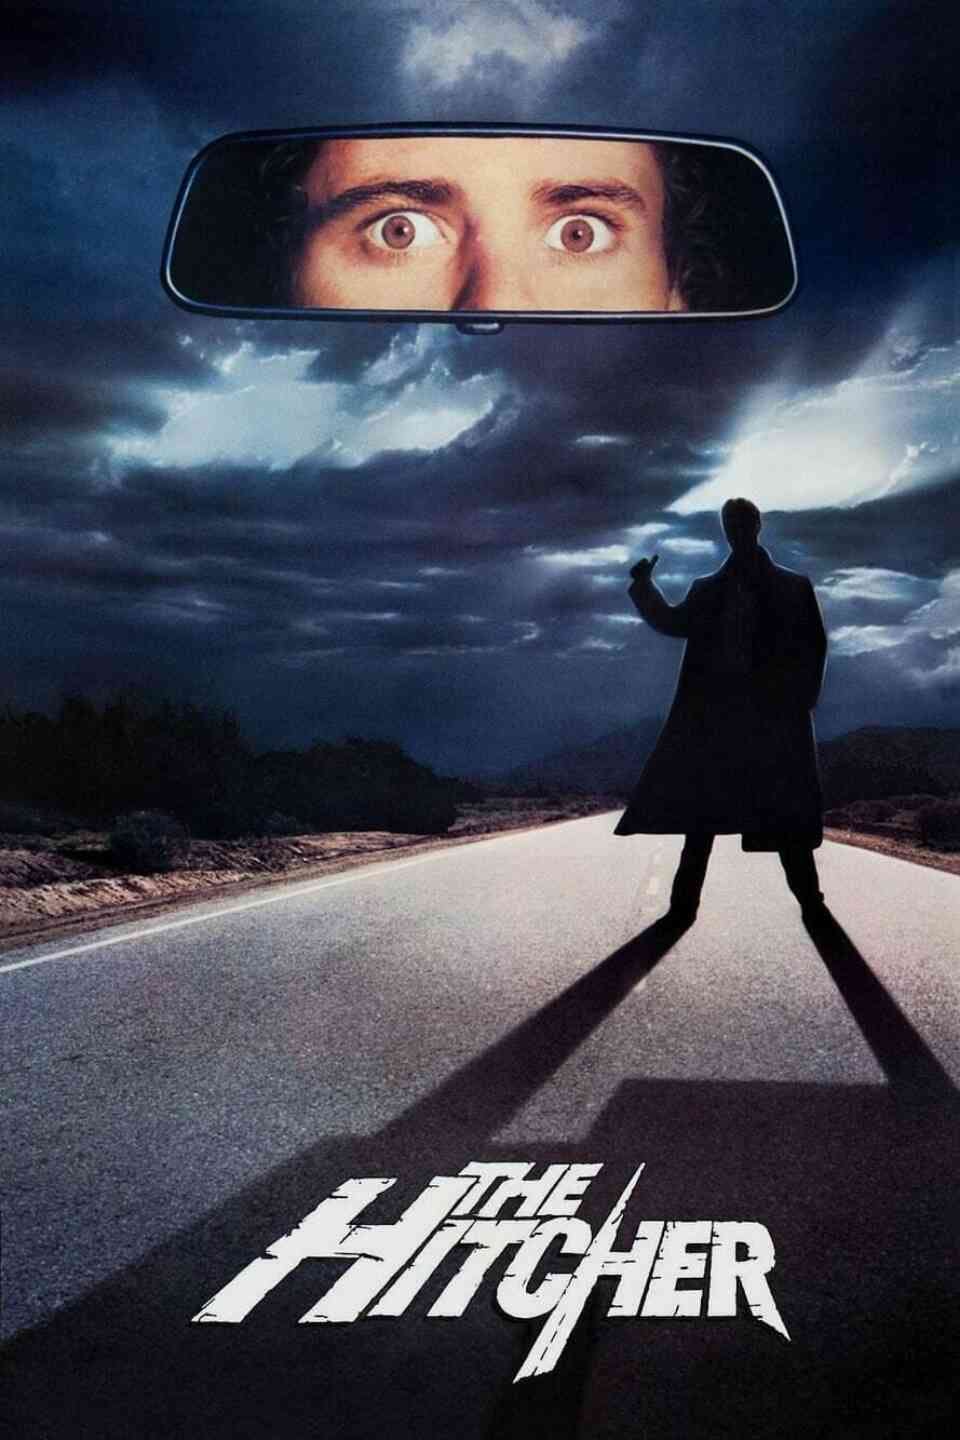 Read The Hitcher screenplay (poster)